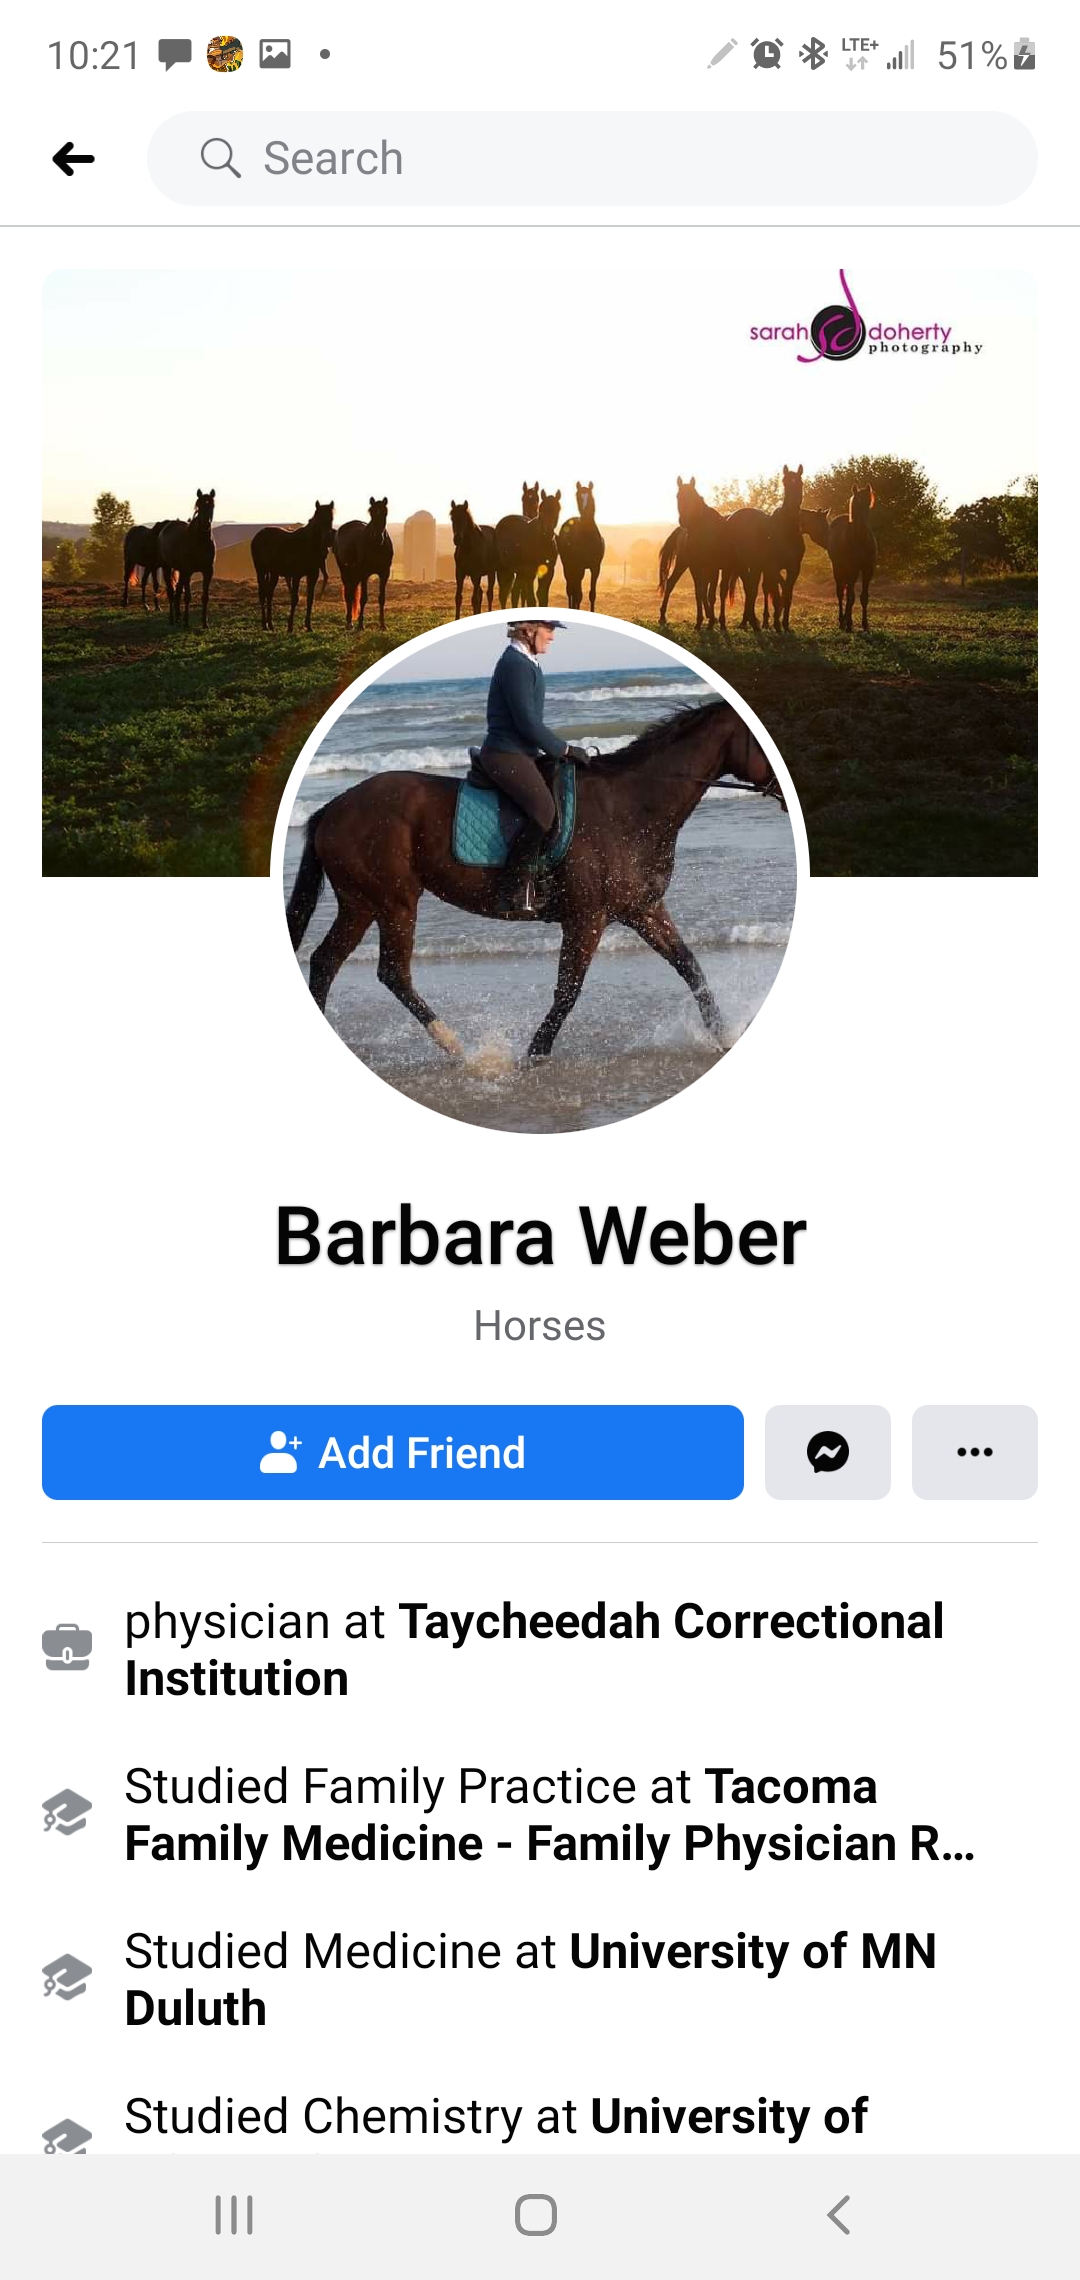 Barbara Weber "MD" doctor of theft, fraud and care